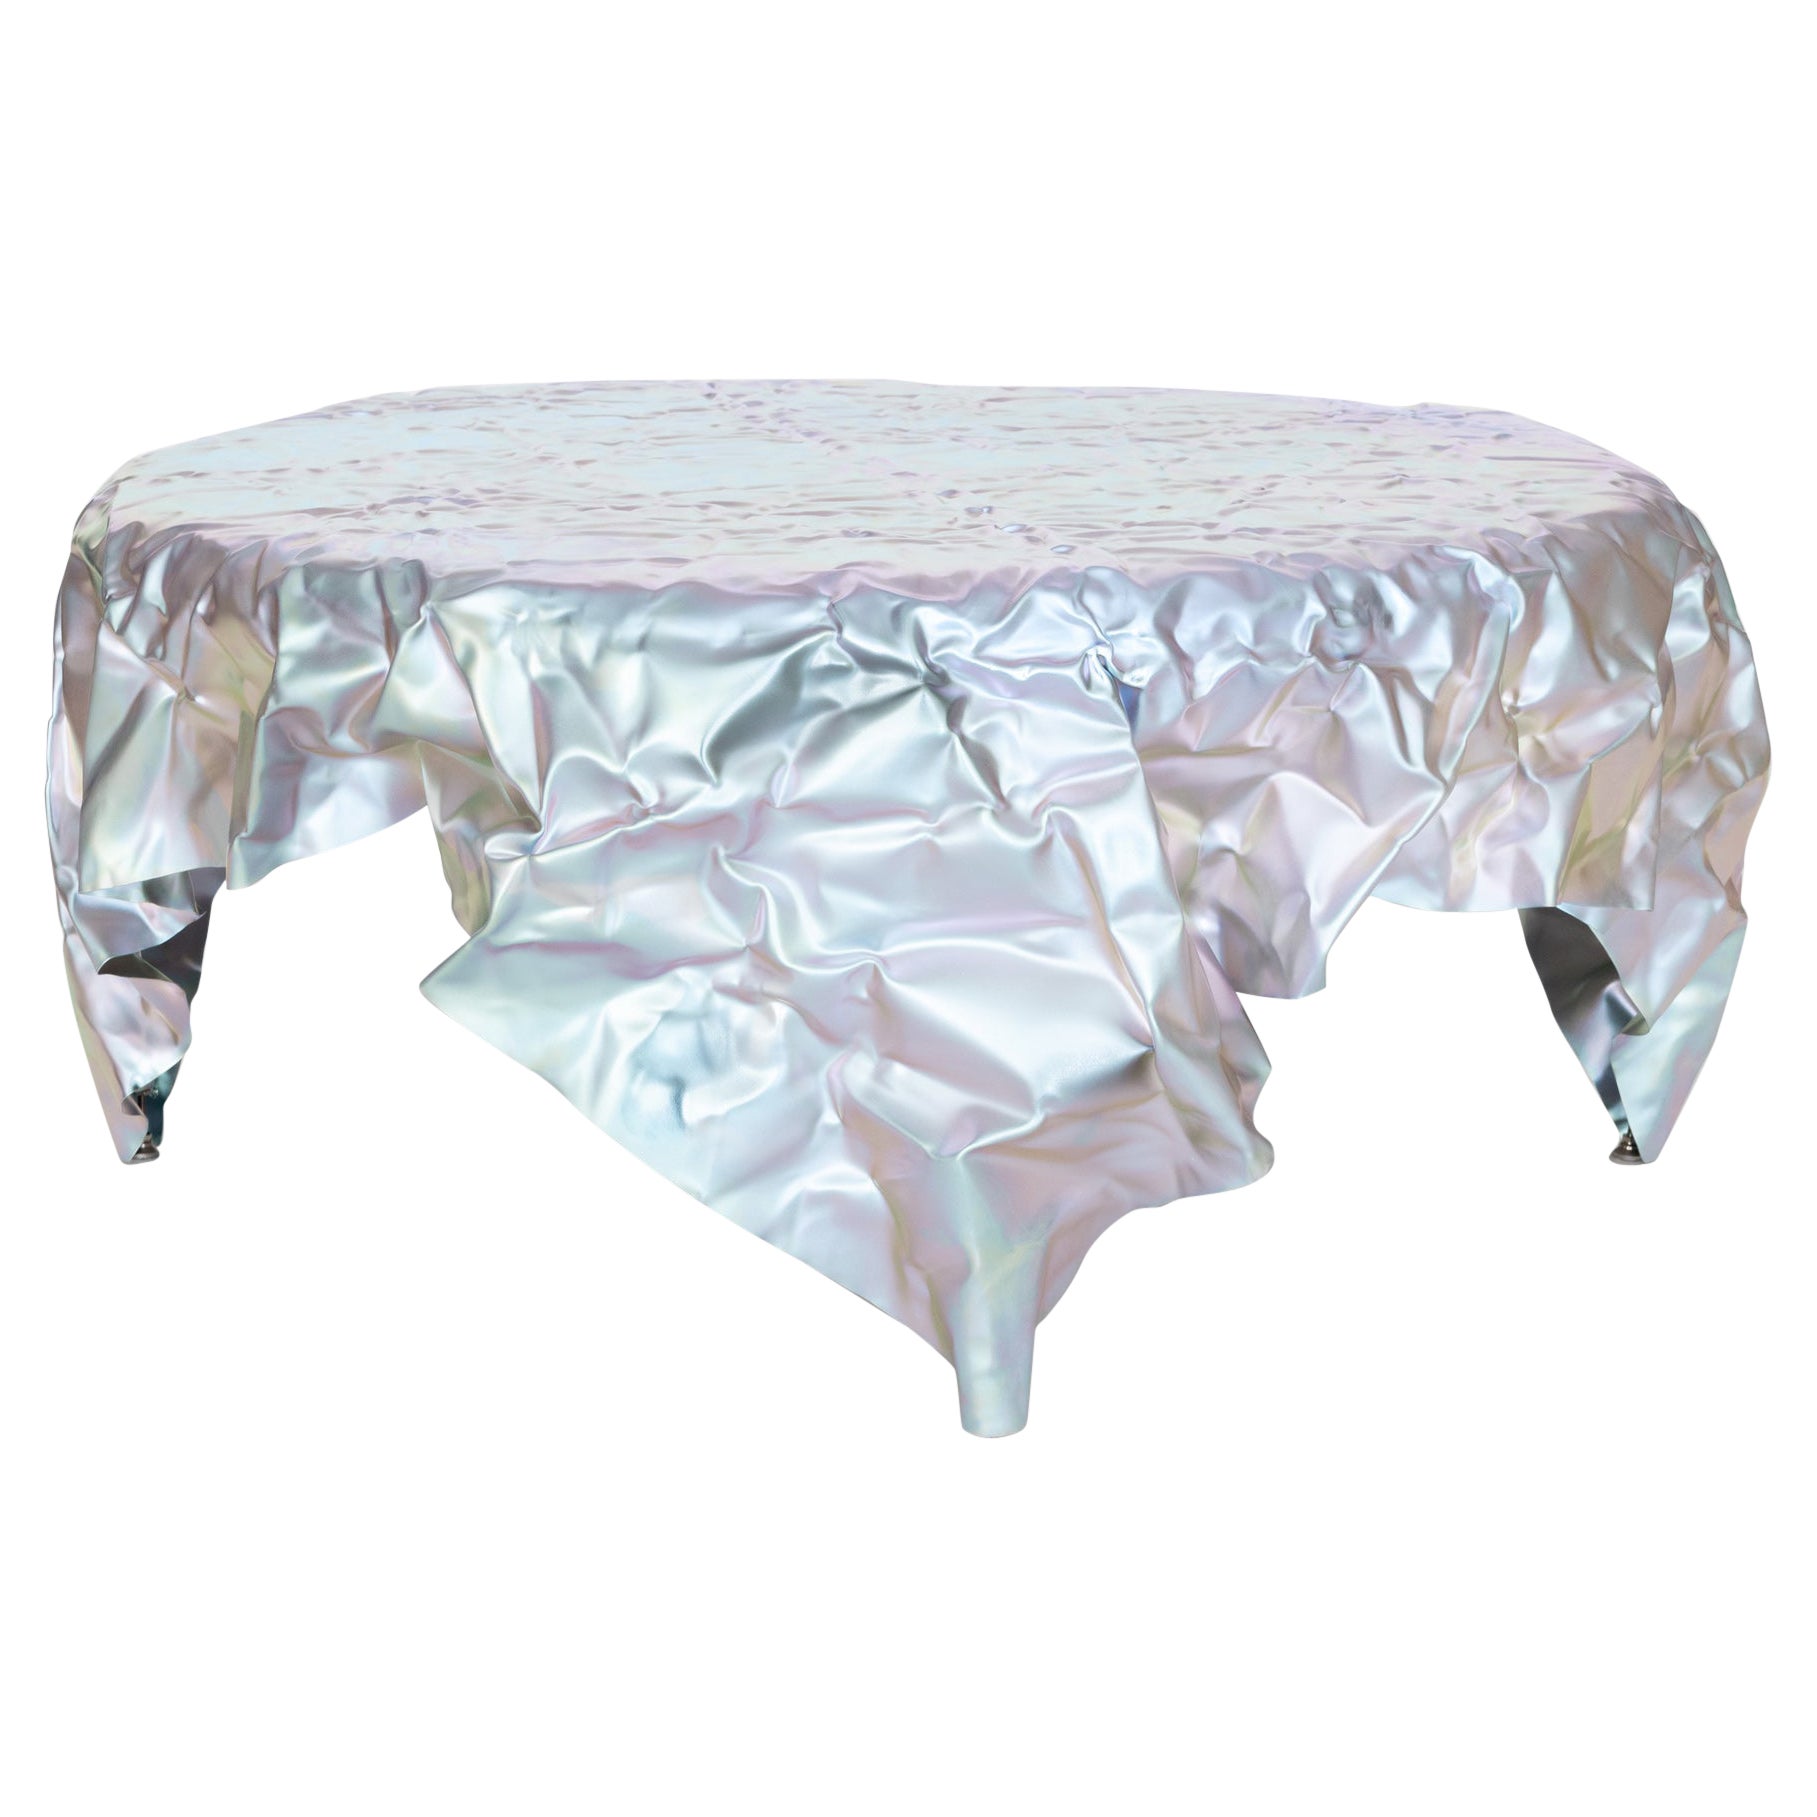 Christopher Prinz “Wrinkled Coffee Table” in Raw Lavender Iridescent  For Sale